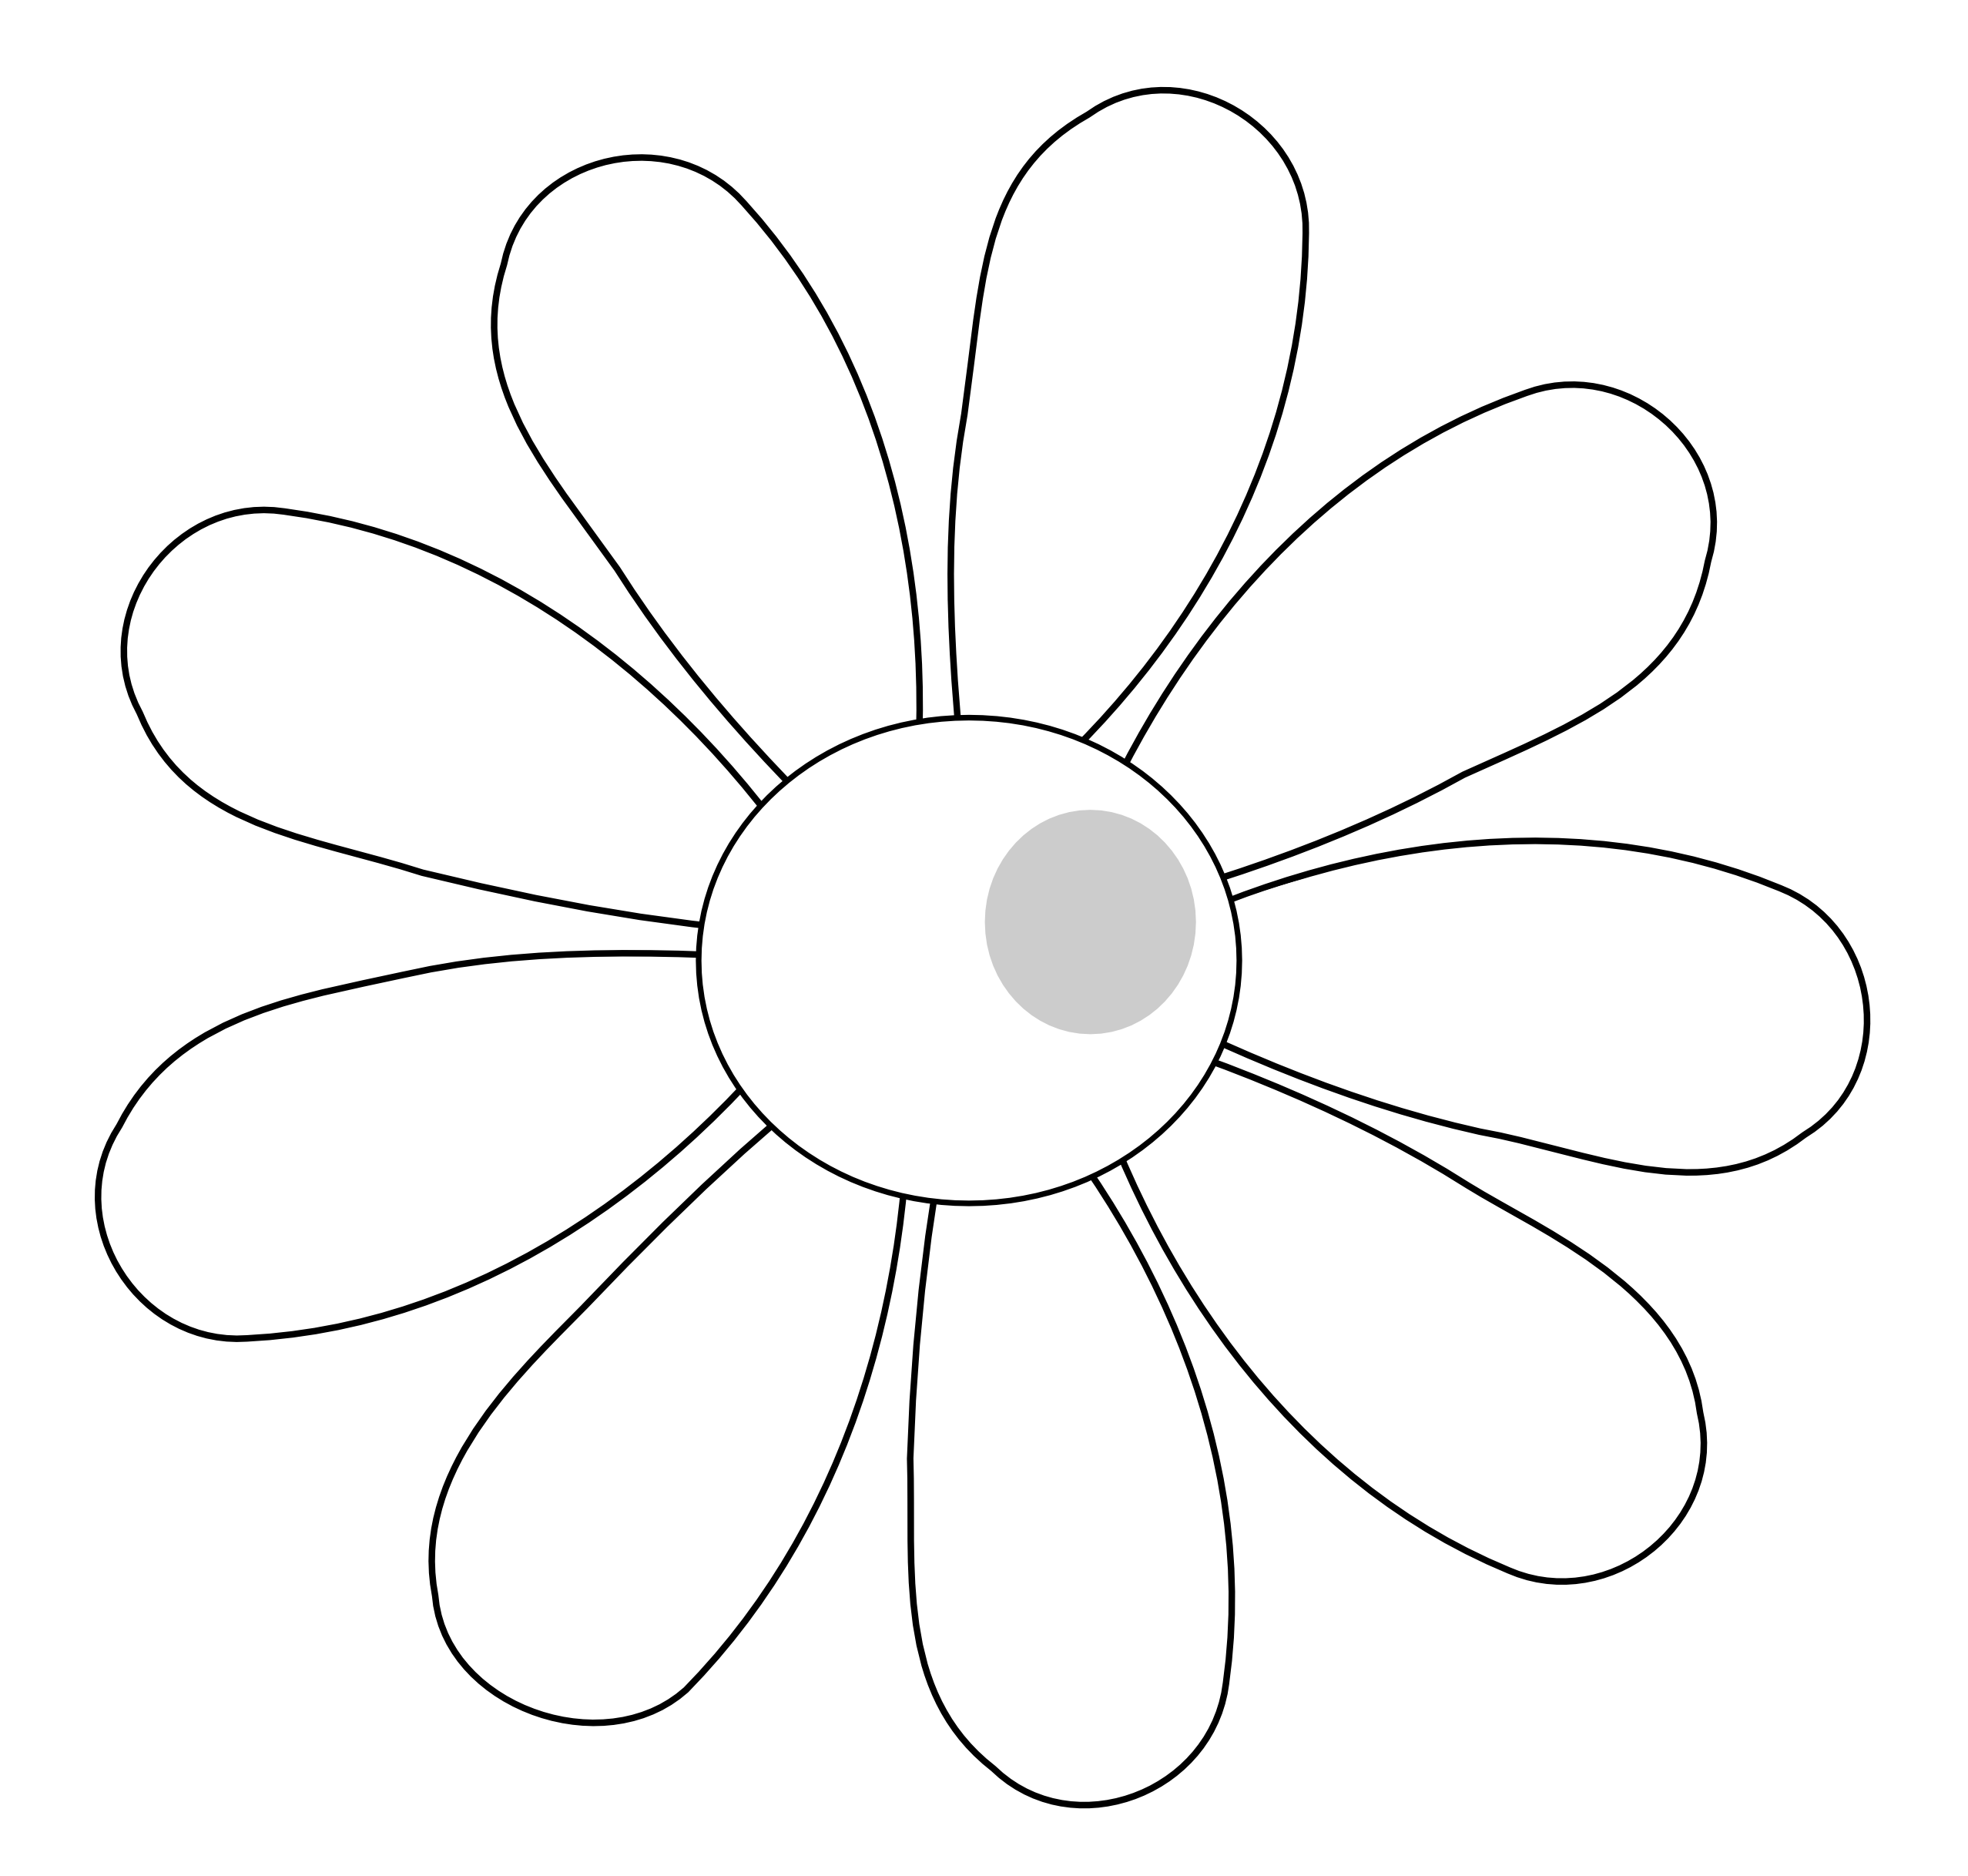 free-daisy-flower-outline-download-free-daisy-flower-outline-png-images-free-cliparts-on